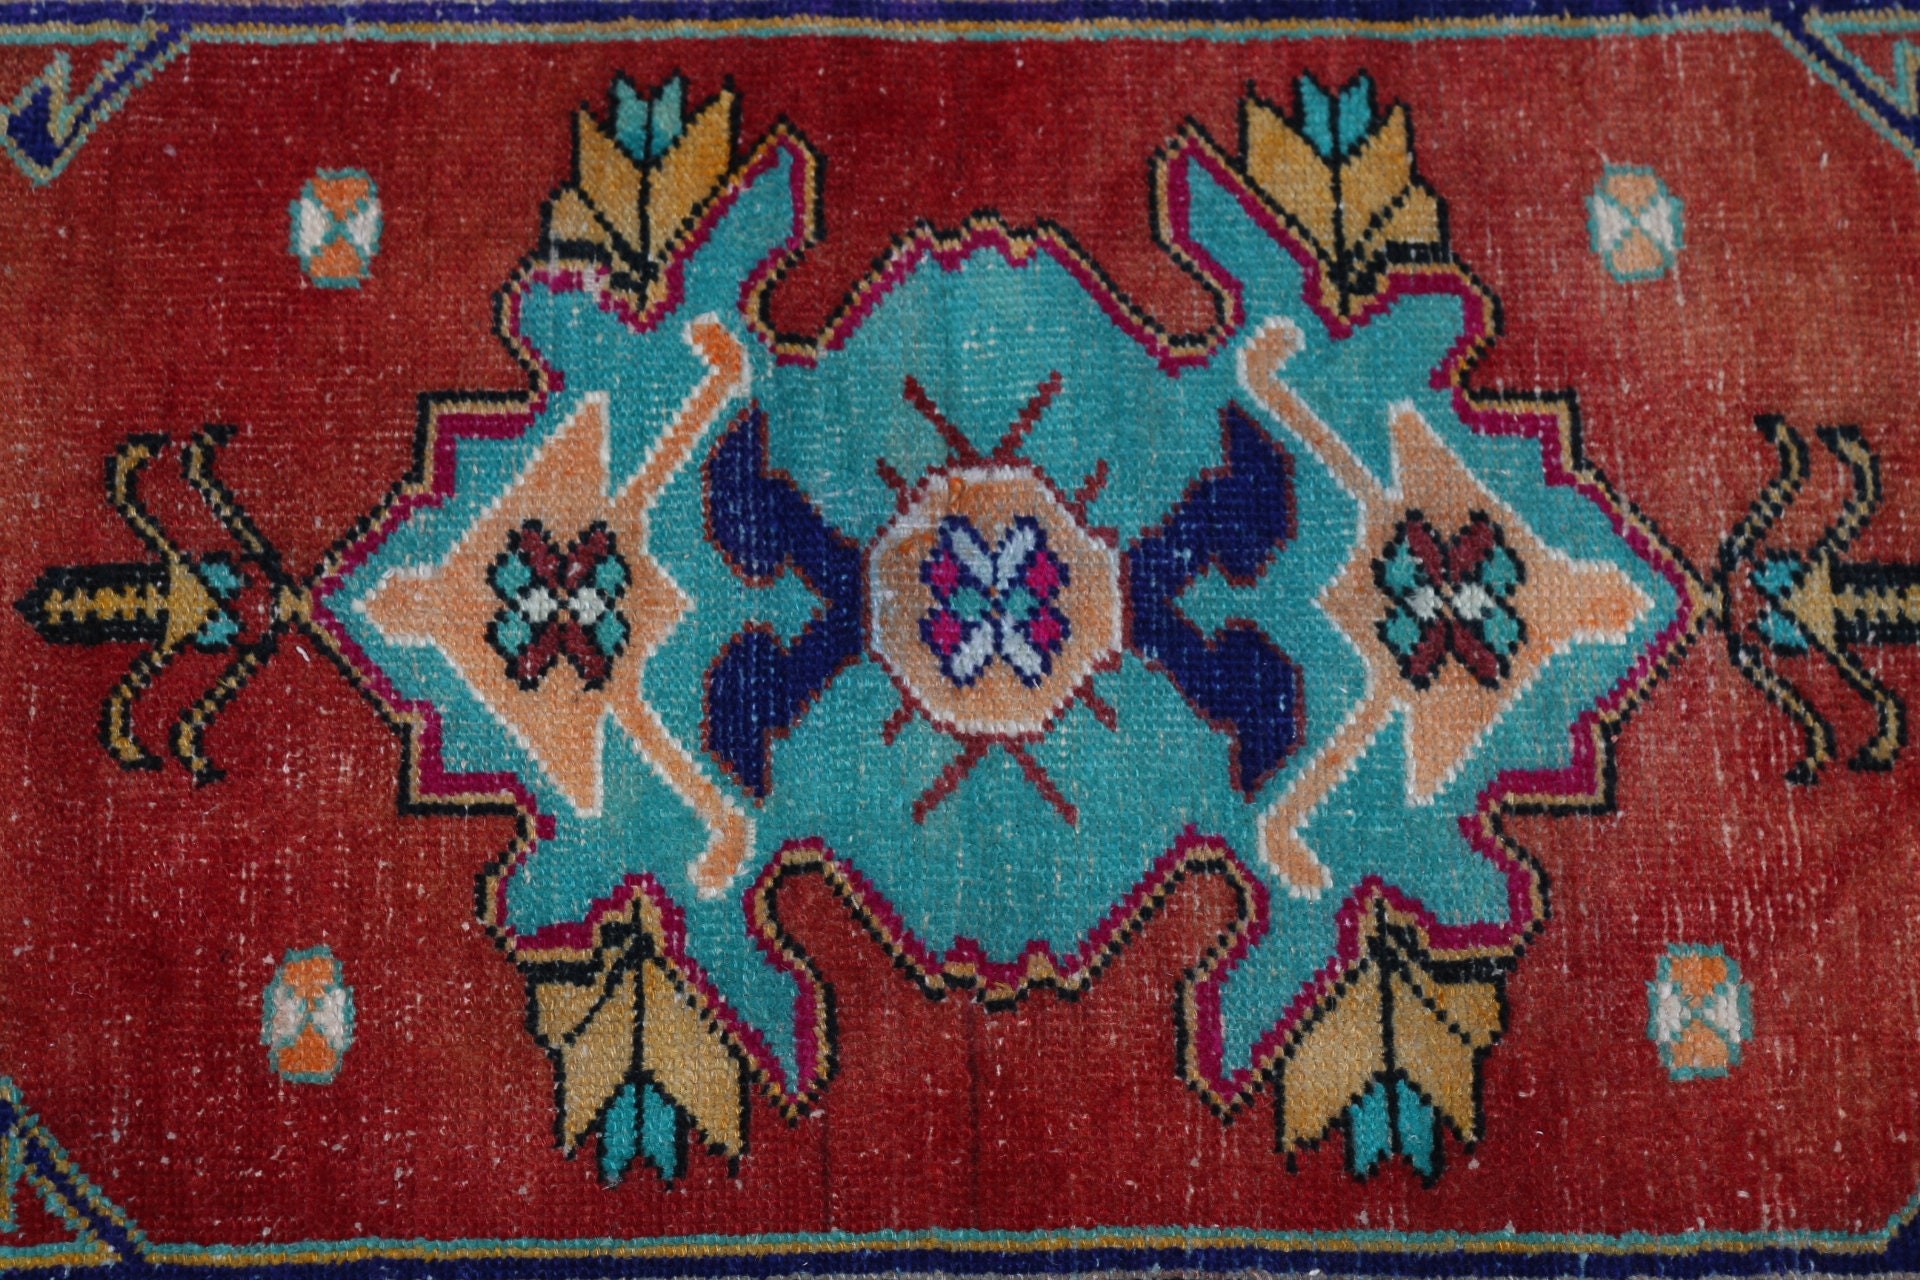 Antique Rug, Turkish Rug, Rugs for Bedroom, Red Oushak Rug, Bath Rug, 1.9x3.7 ft Small Rugs, Kitchen Rugs, Vintage Rugs